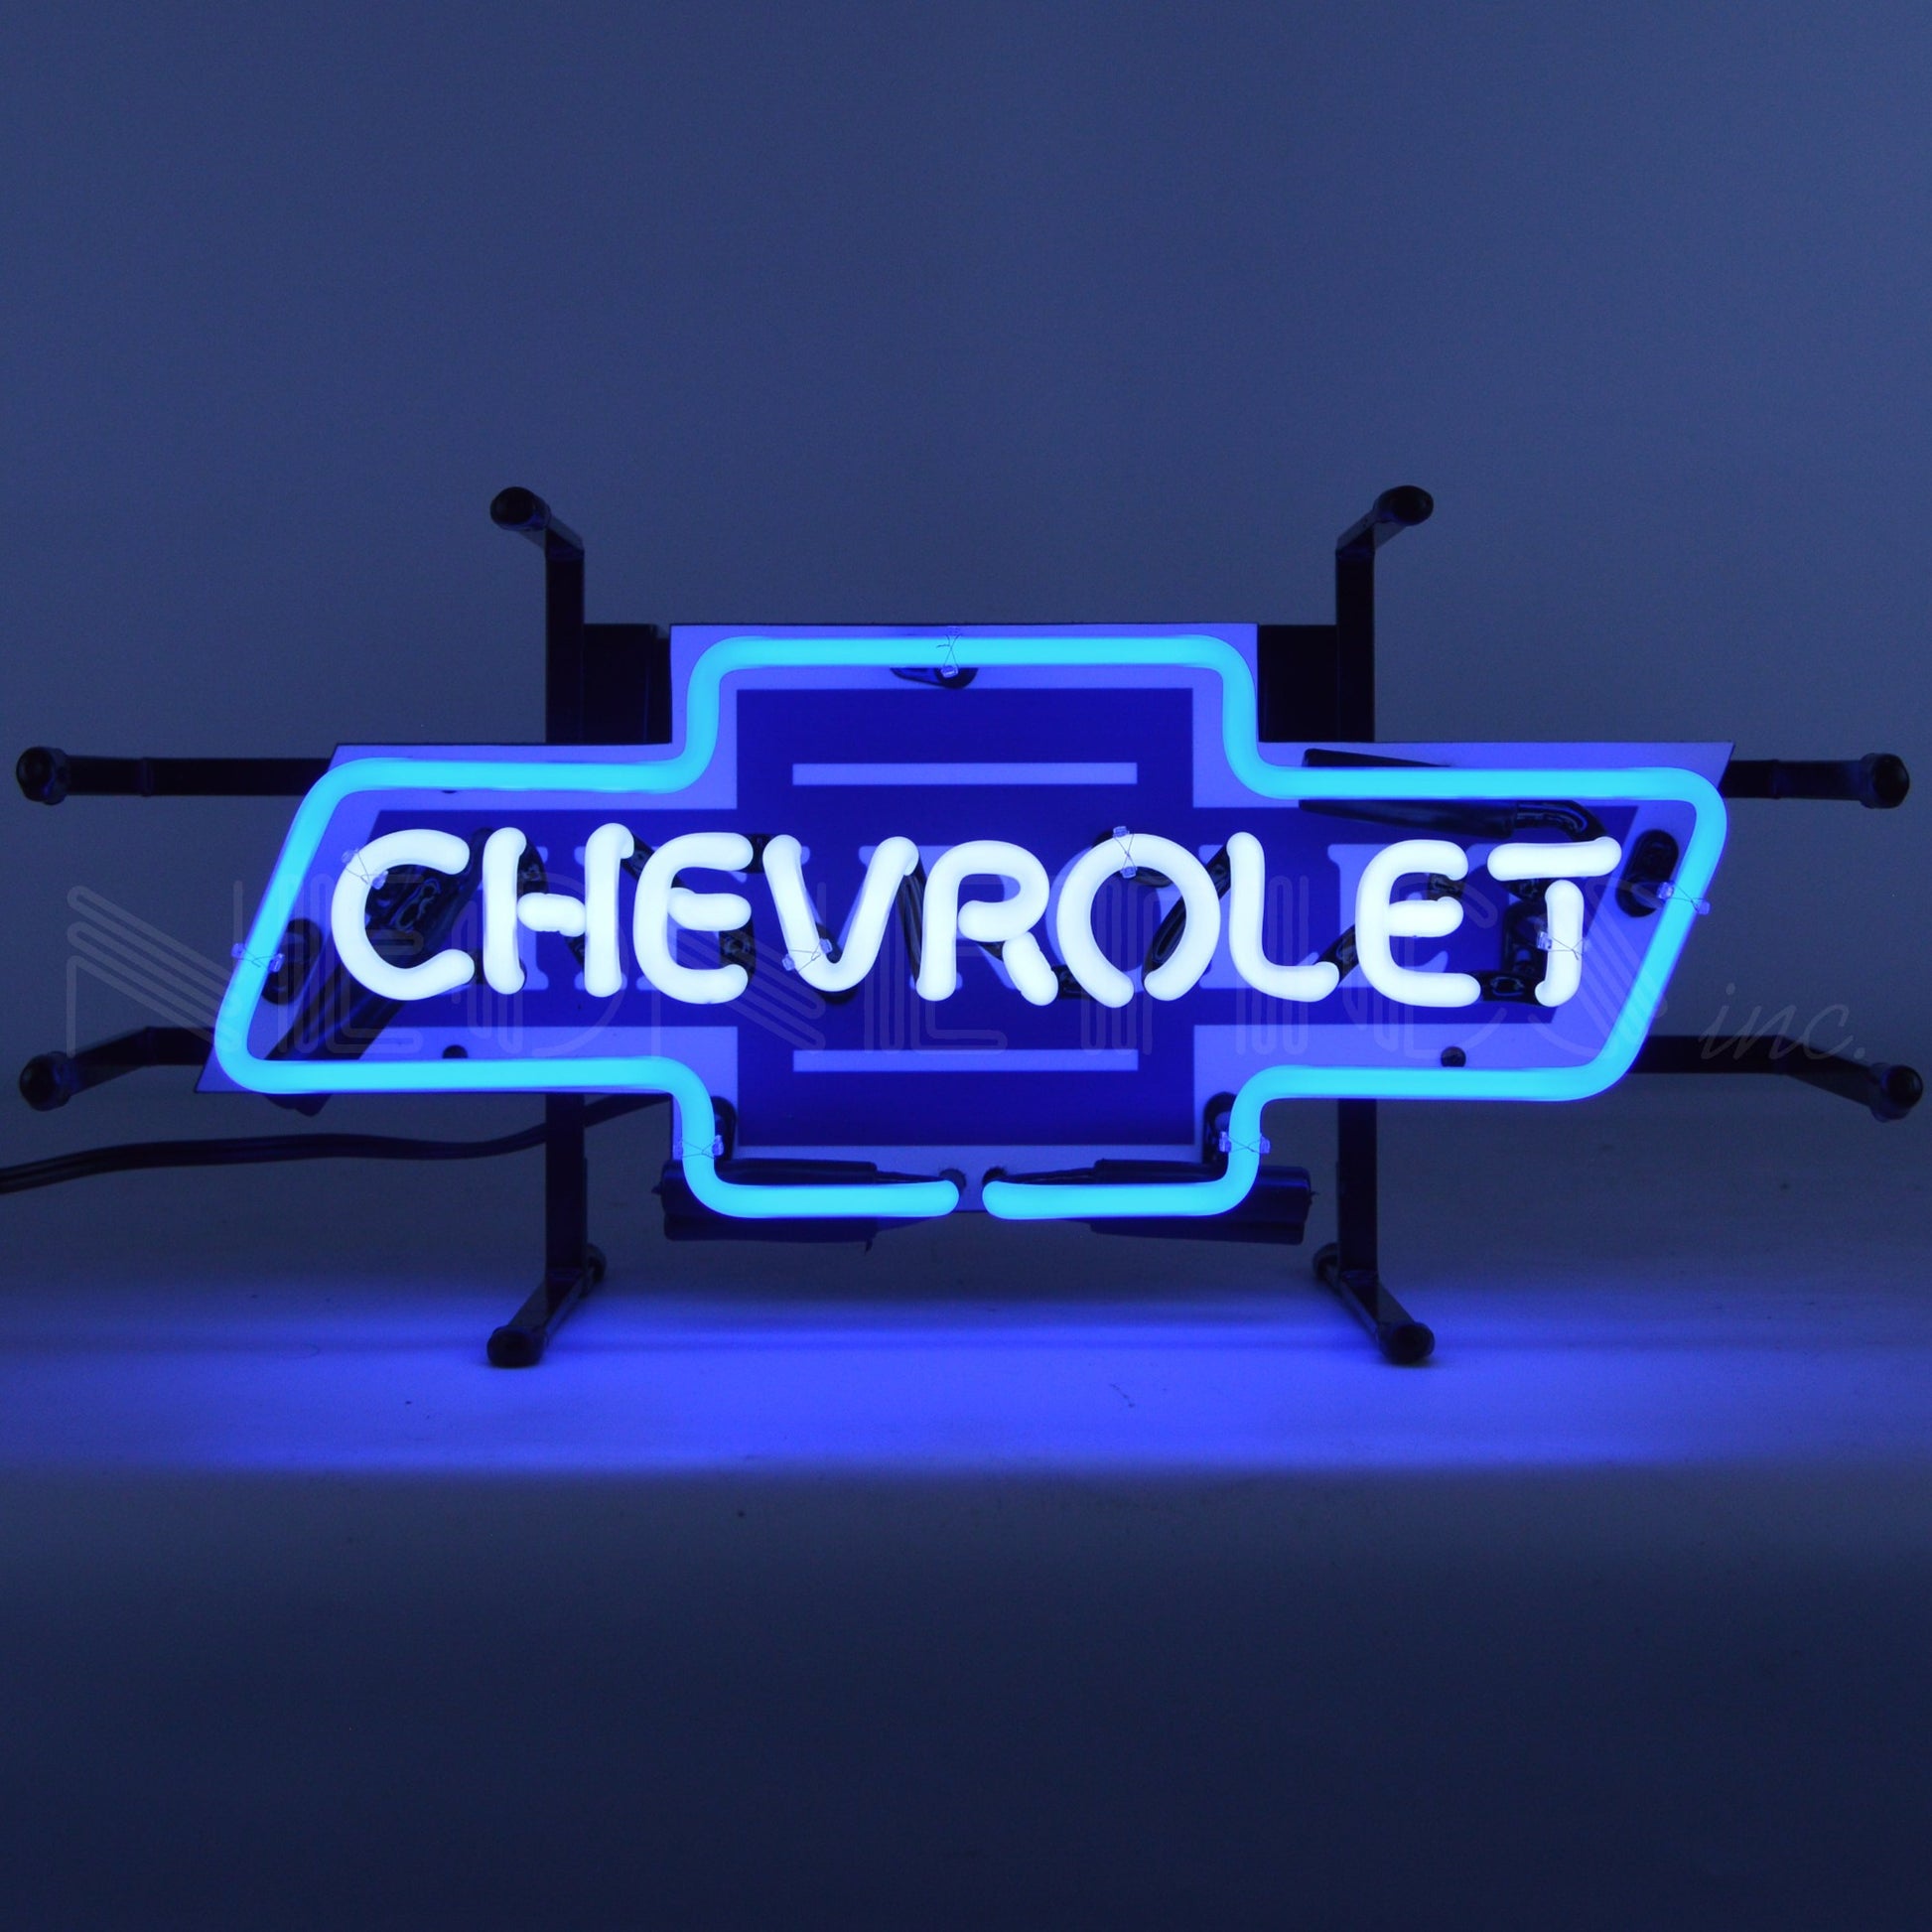 Chevrolet Bowtie Junior Neon Sign in blue, showcasing the iconic Chevrolet logo, perfect for adding a vibrant touch to any room